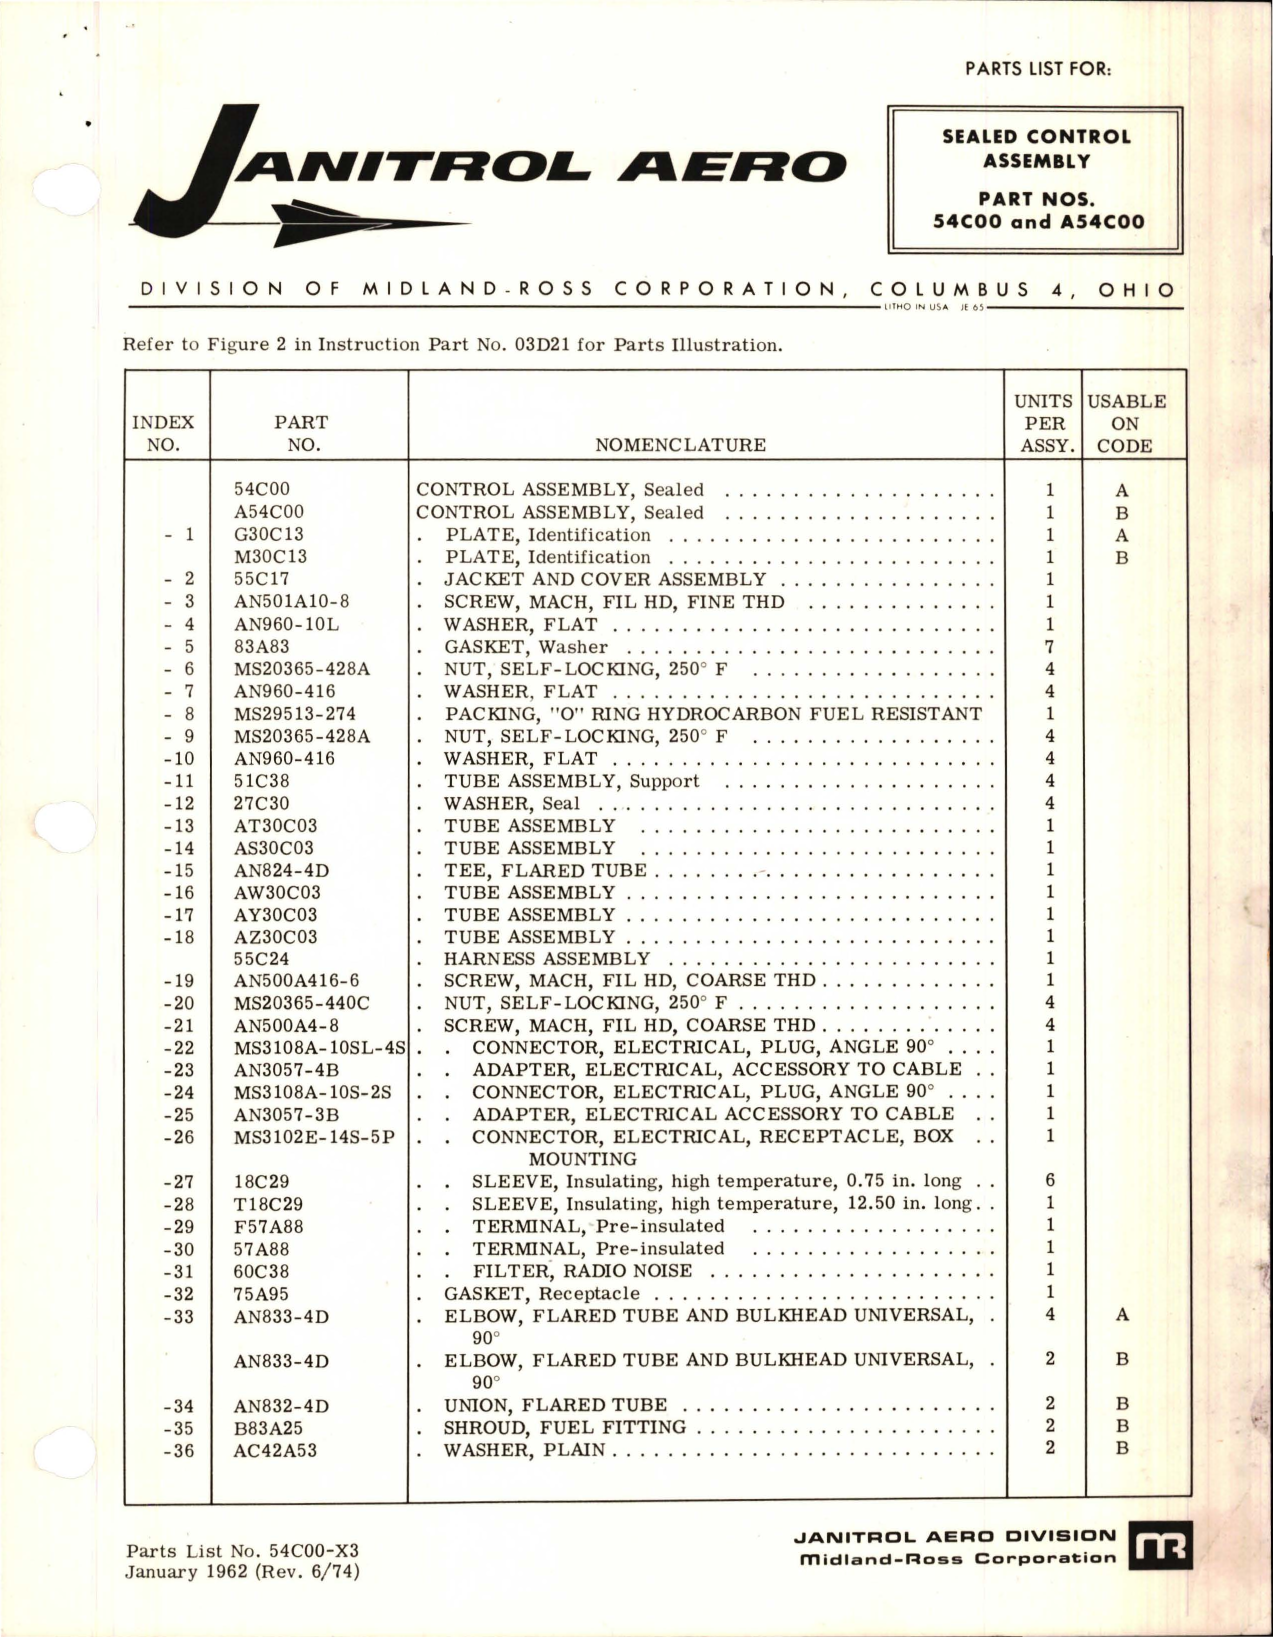 Sample page 1 from AirCorps Library document: Parts List for Sealed Control Assembly - Part 54C00 & A54C00